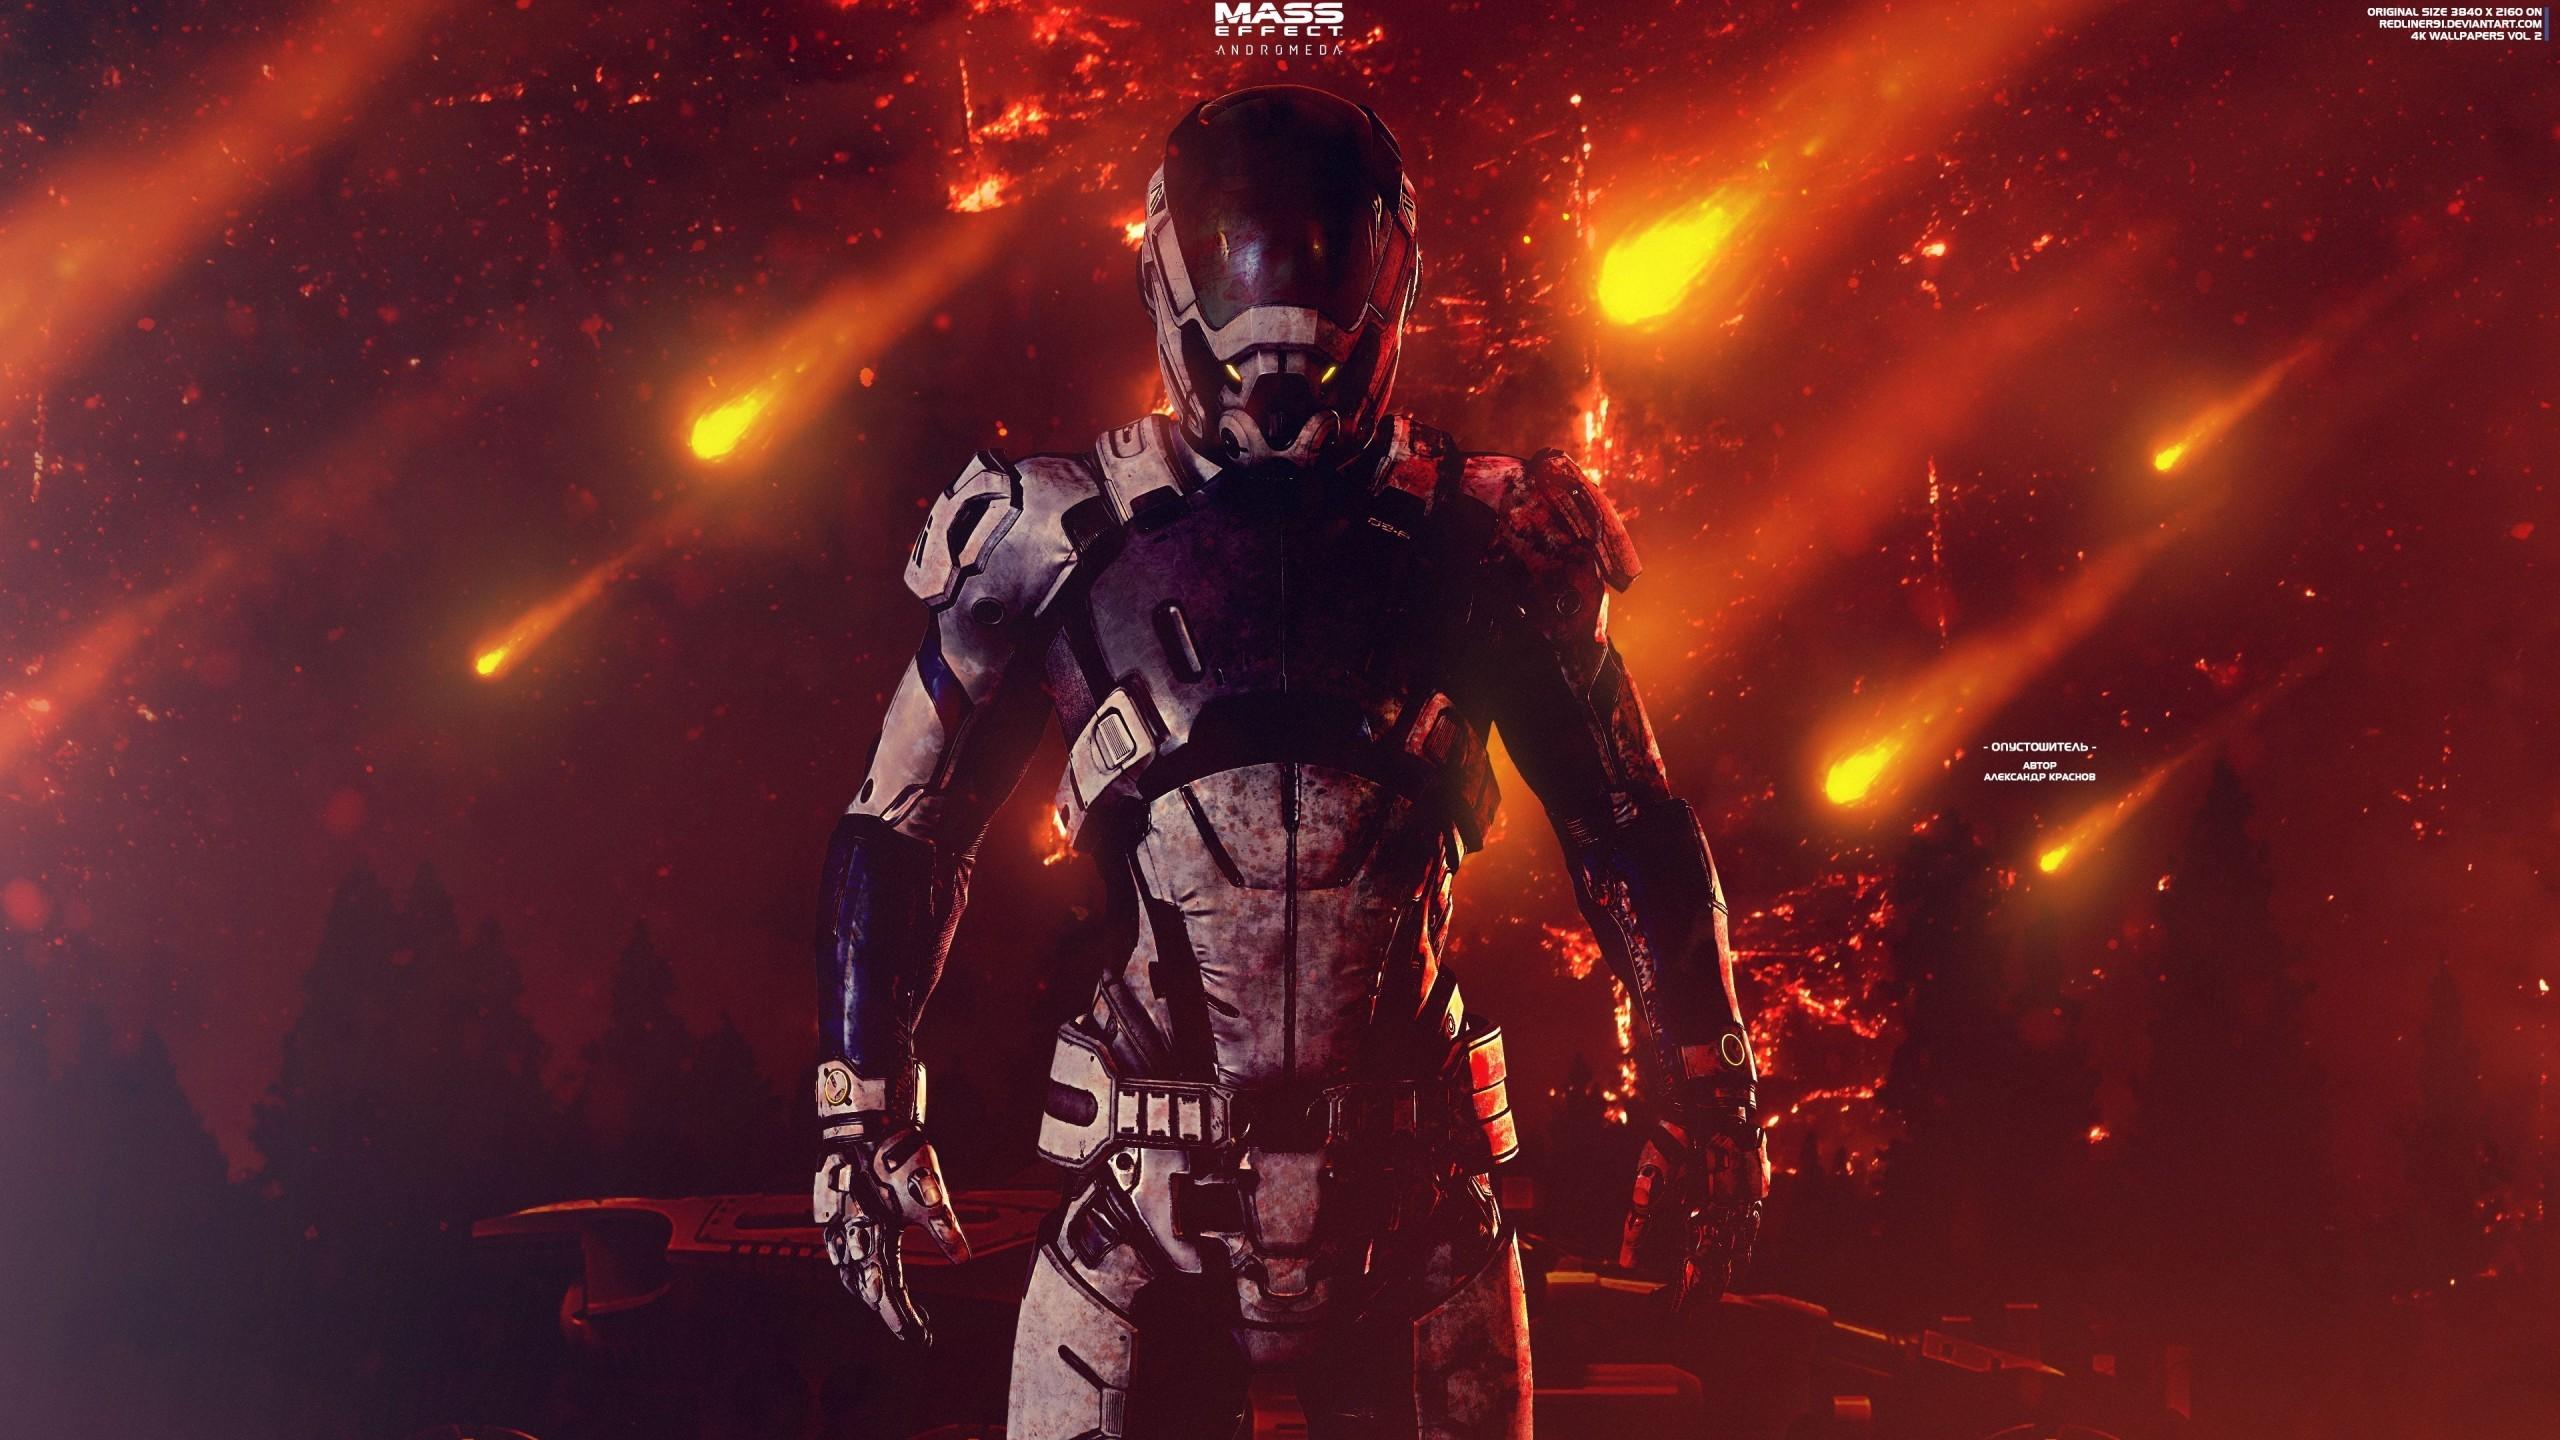 Download 2560x1440 Mass Effect Andromeda, Fire, Suit, Artwork